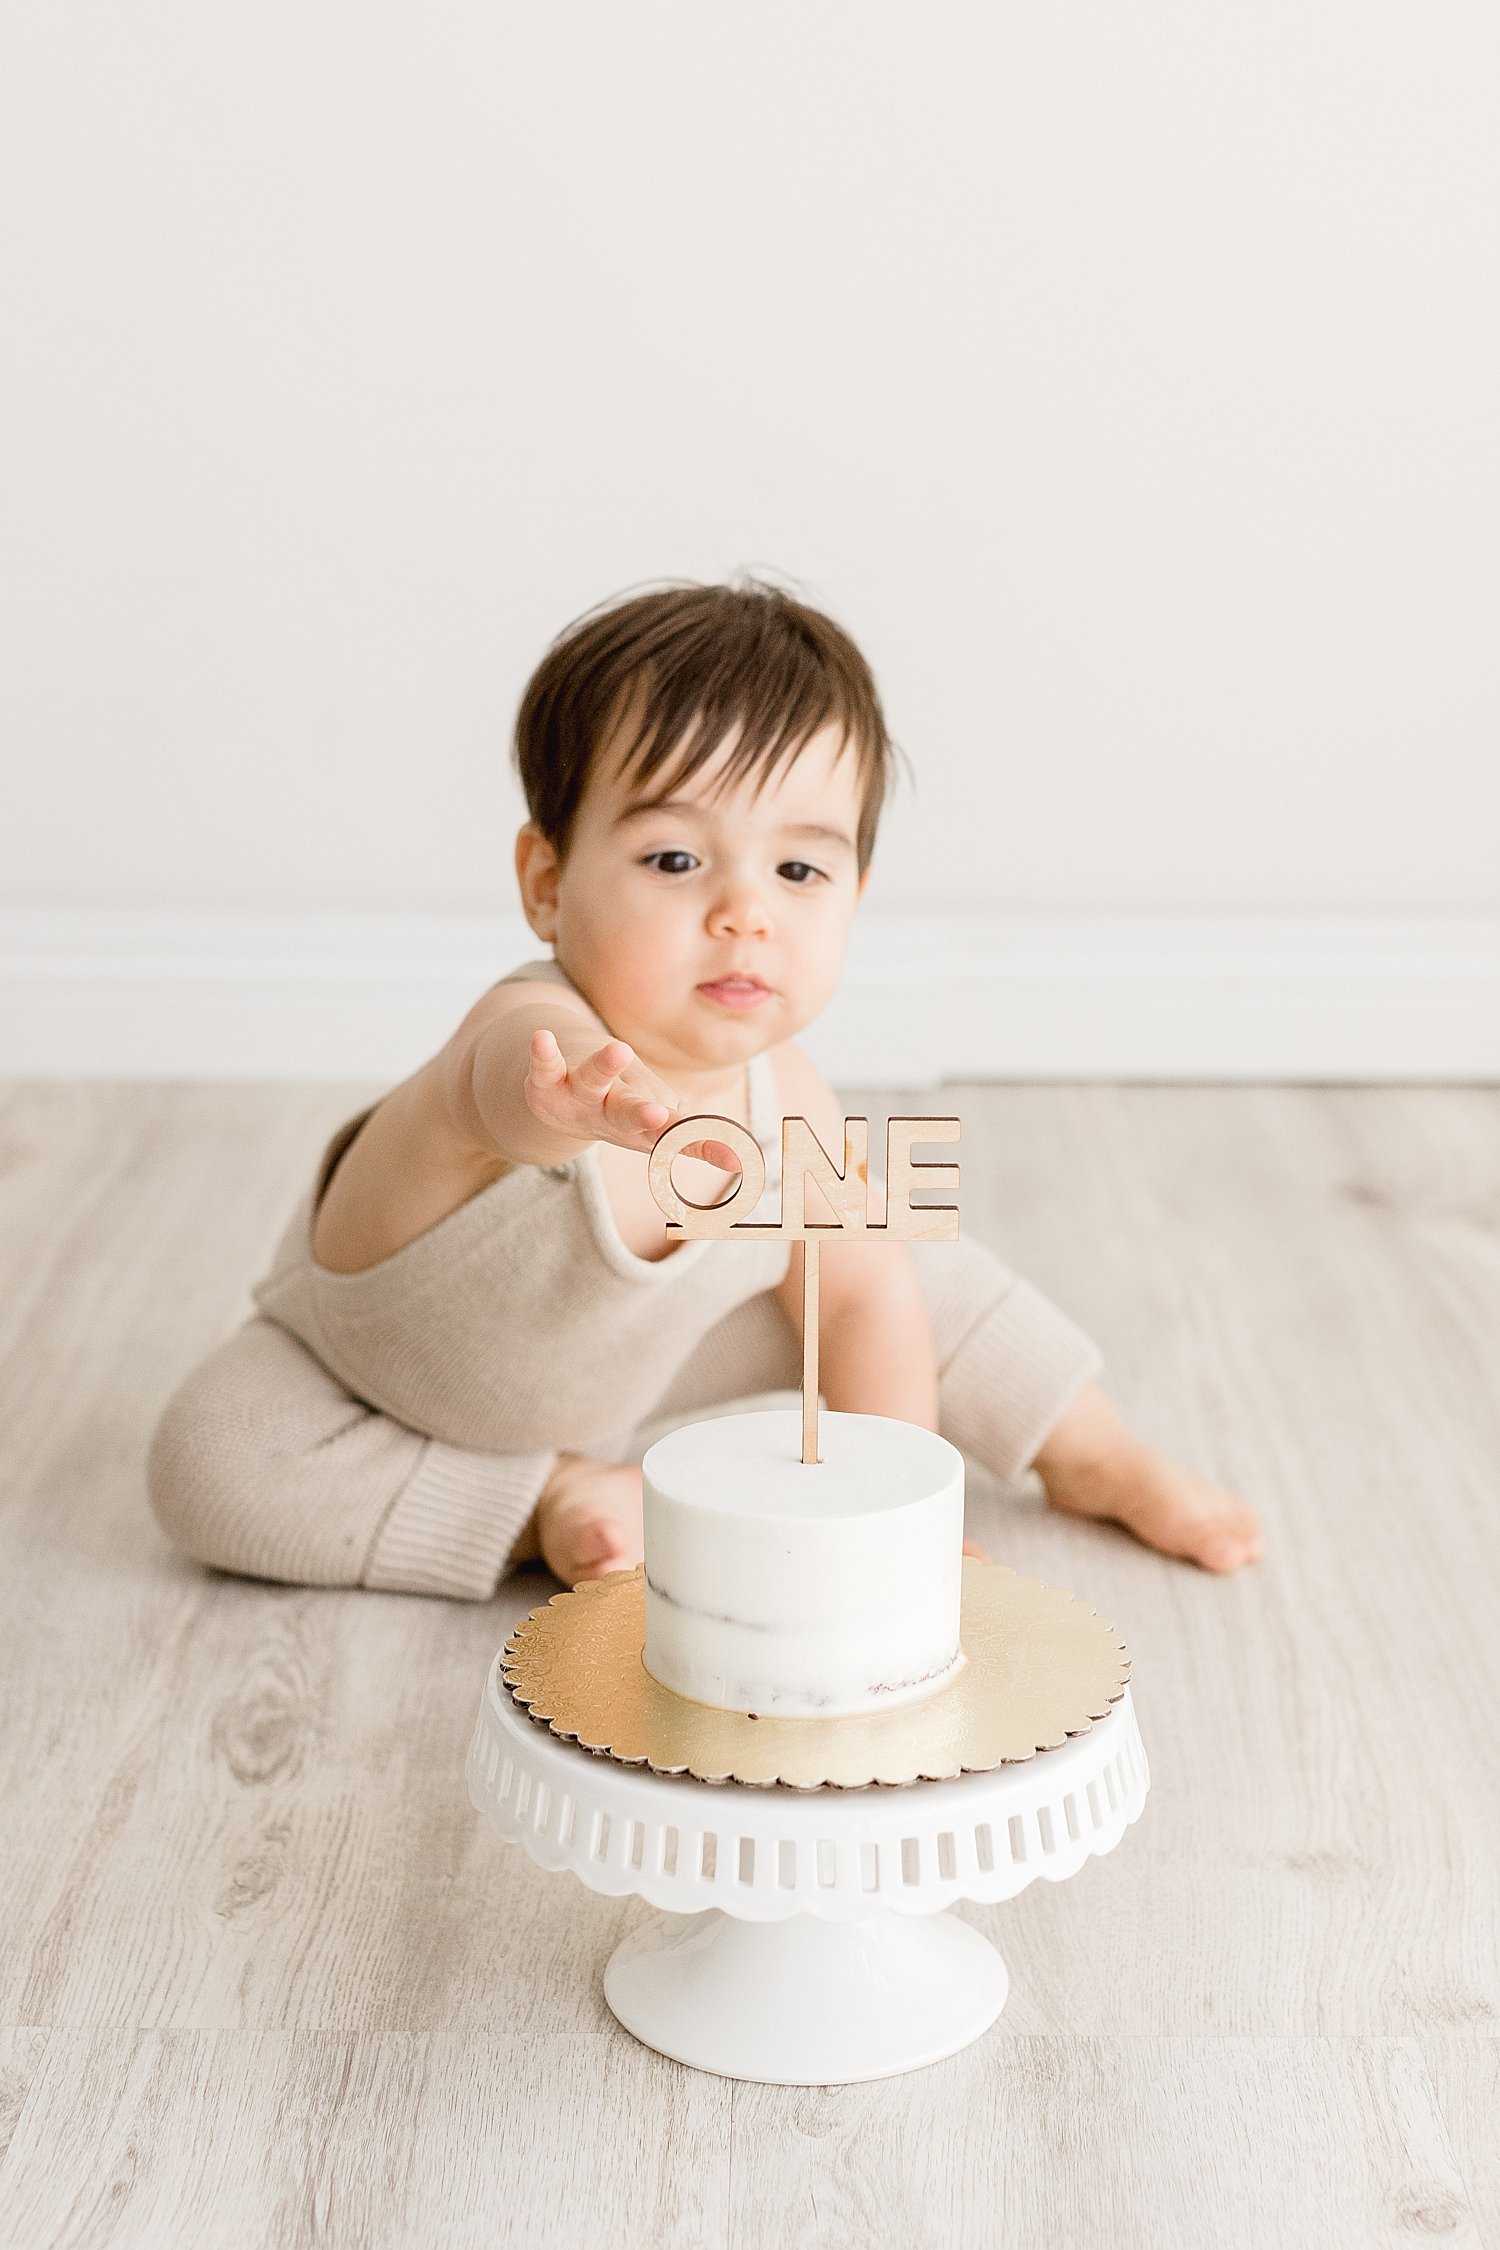 Cake smash session in Newport Beach studio for one year old with Ambre Williams Photography.